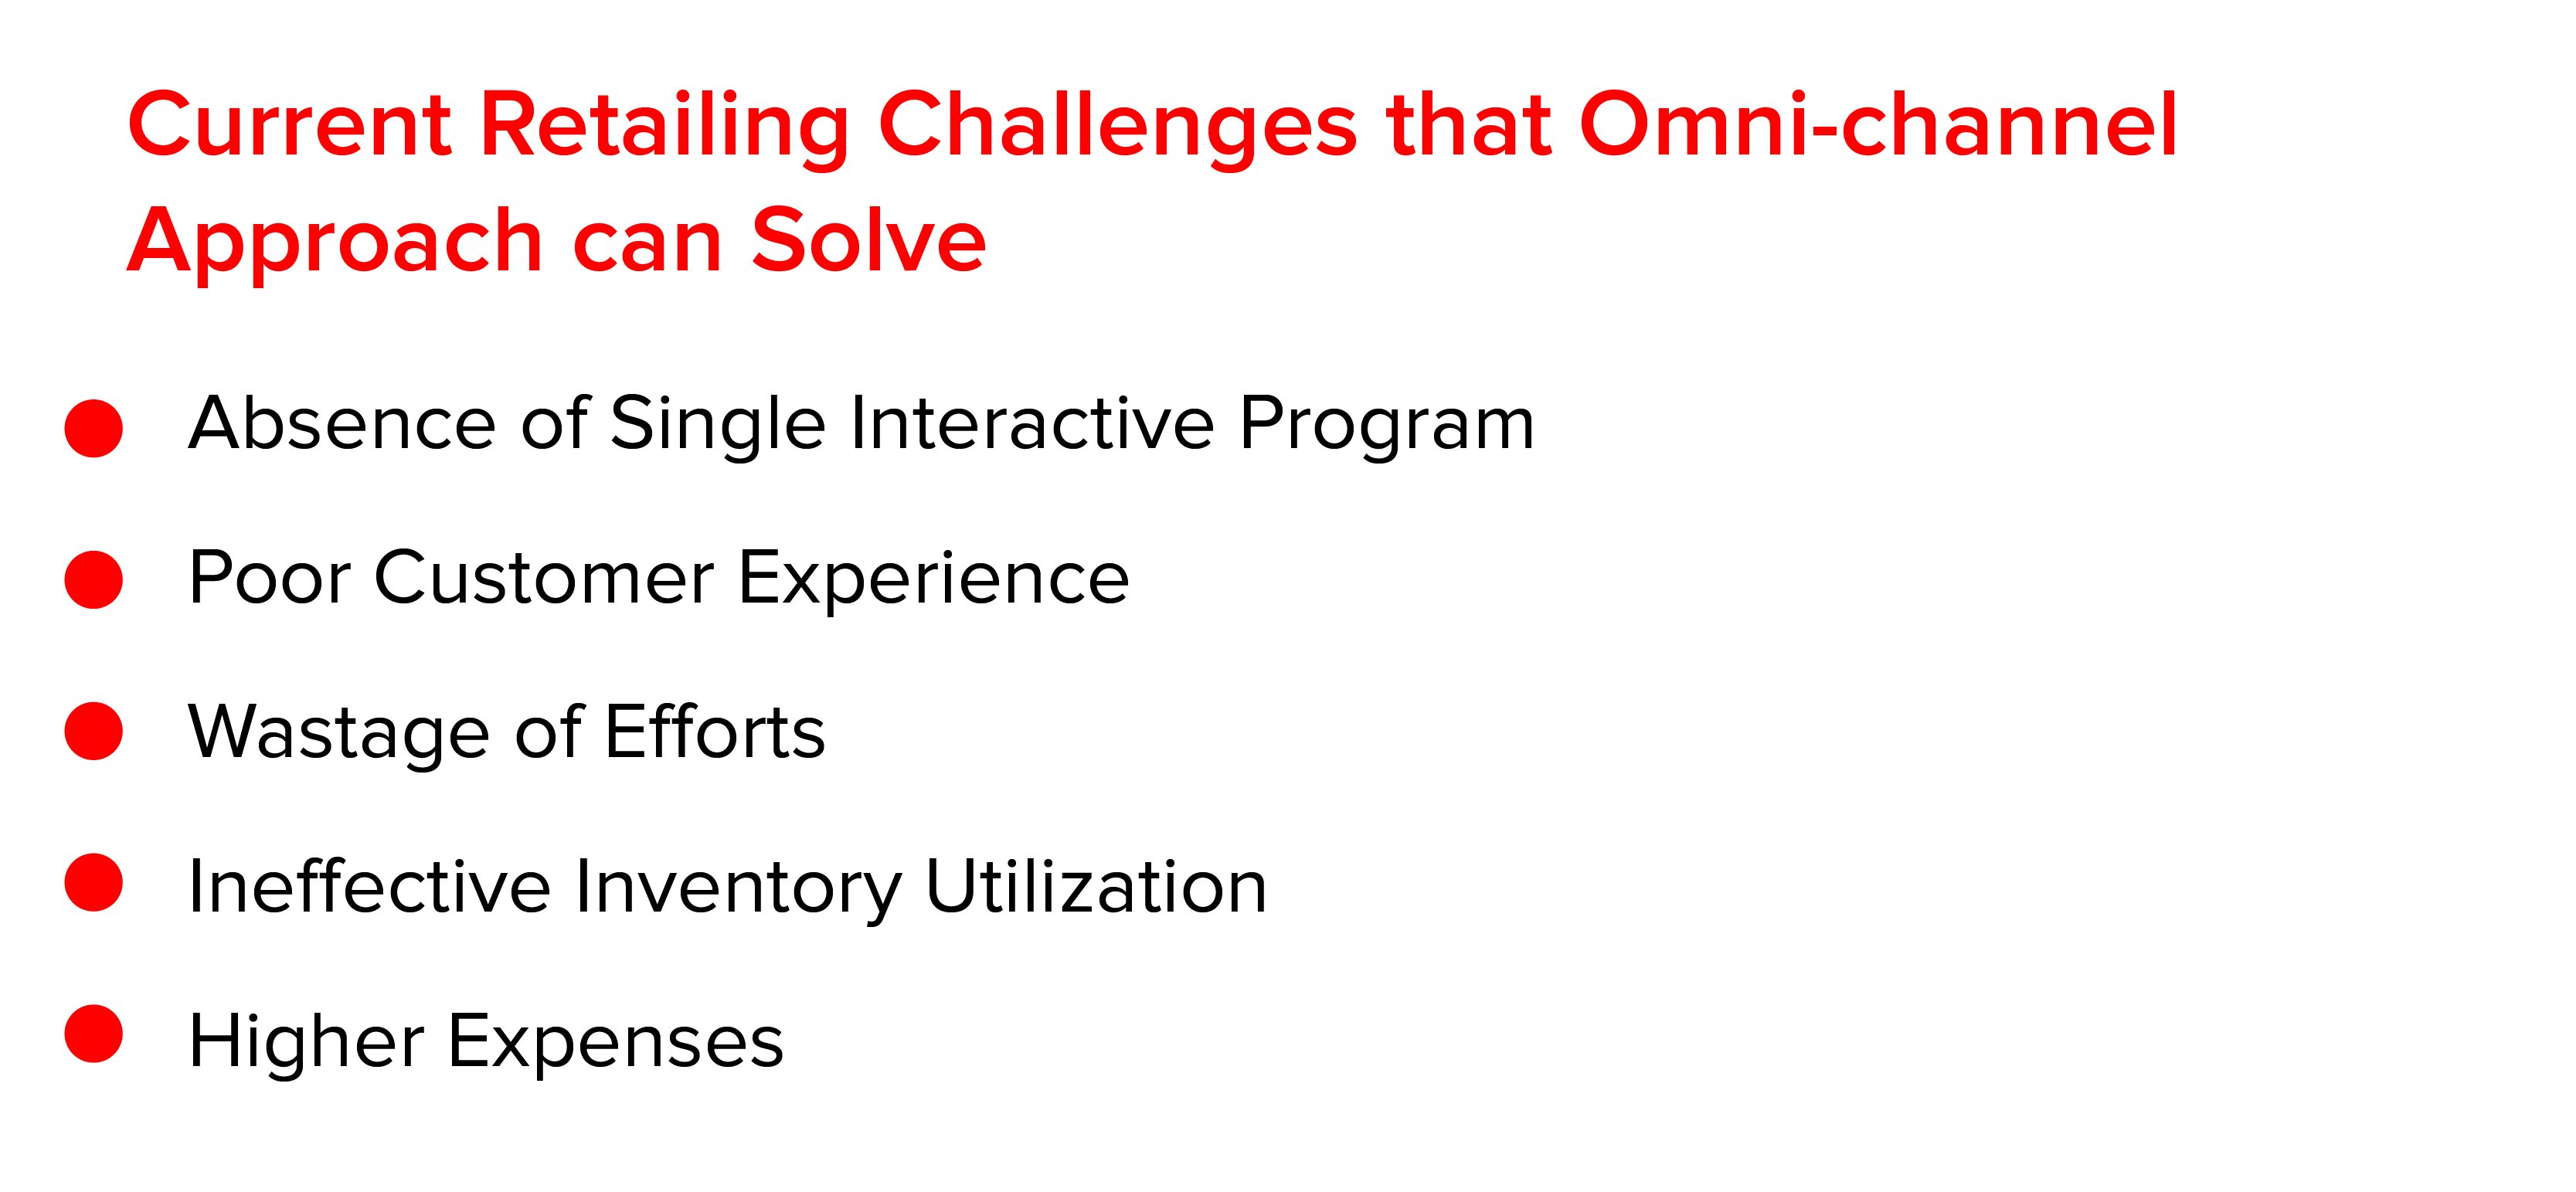 Current Retailing Challenges that Omni-channel Approach can Solve